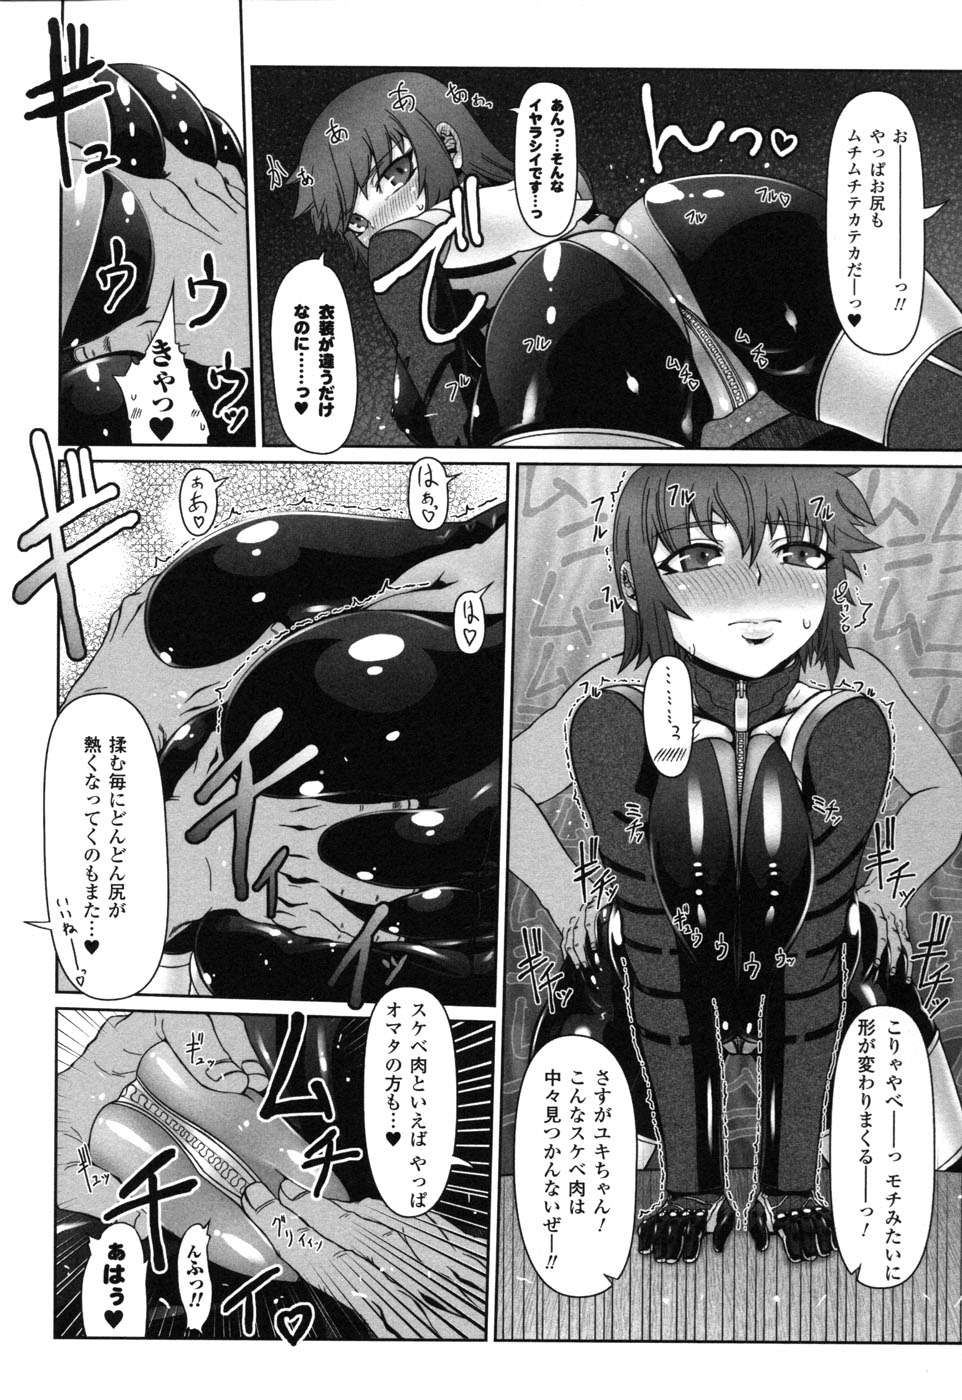 Rider Suit Heroine Anthology Comics 2 page 32 full